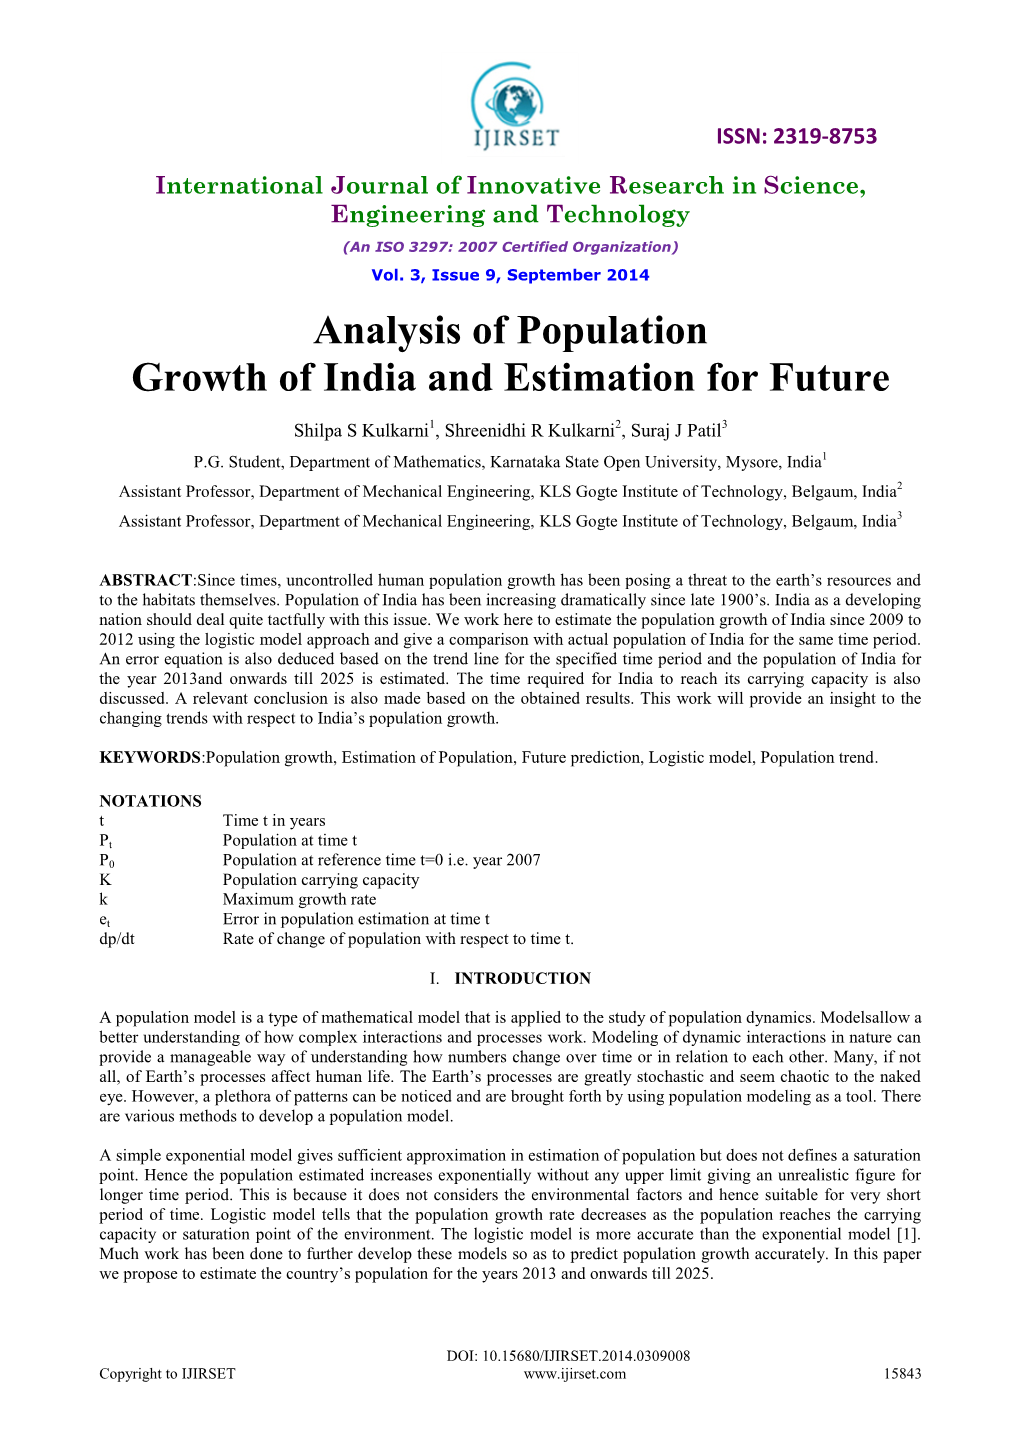 Analysis of Population Growth of India and Estimation for Future